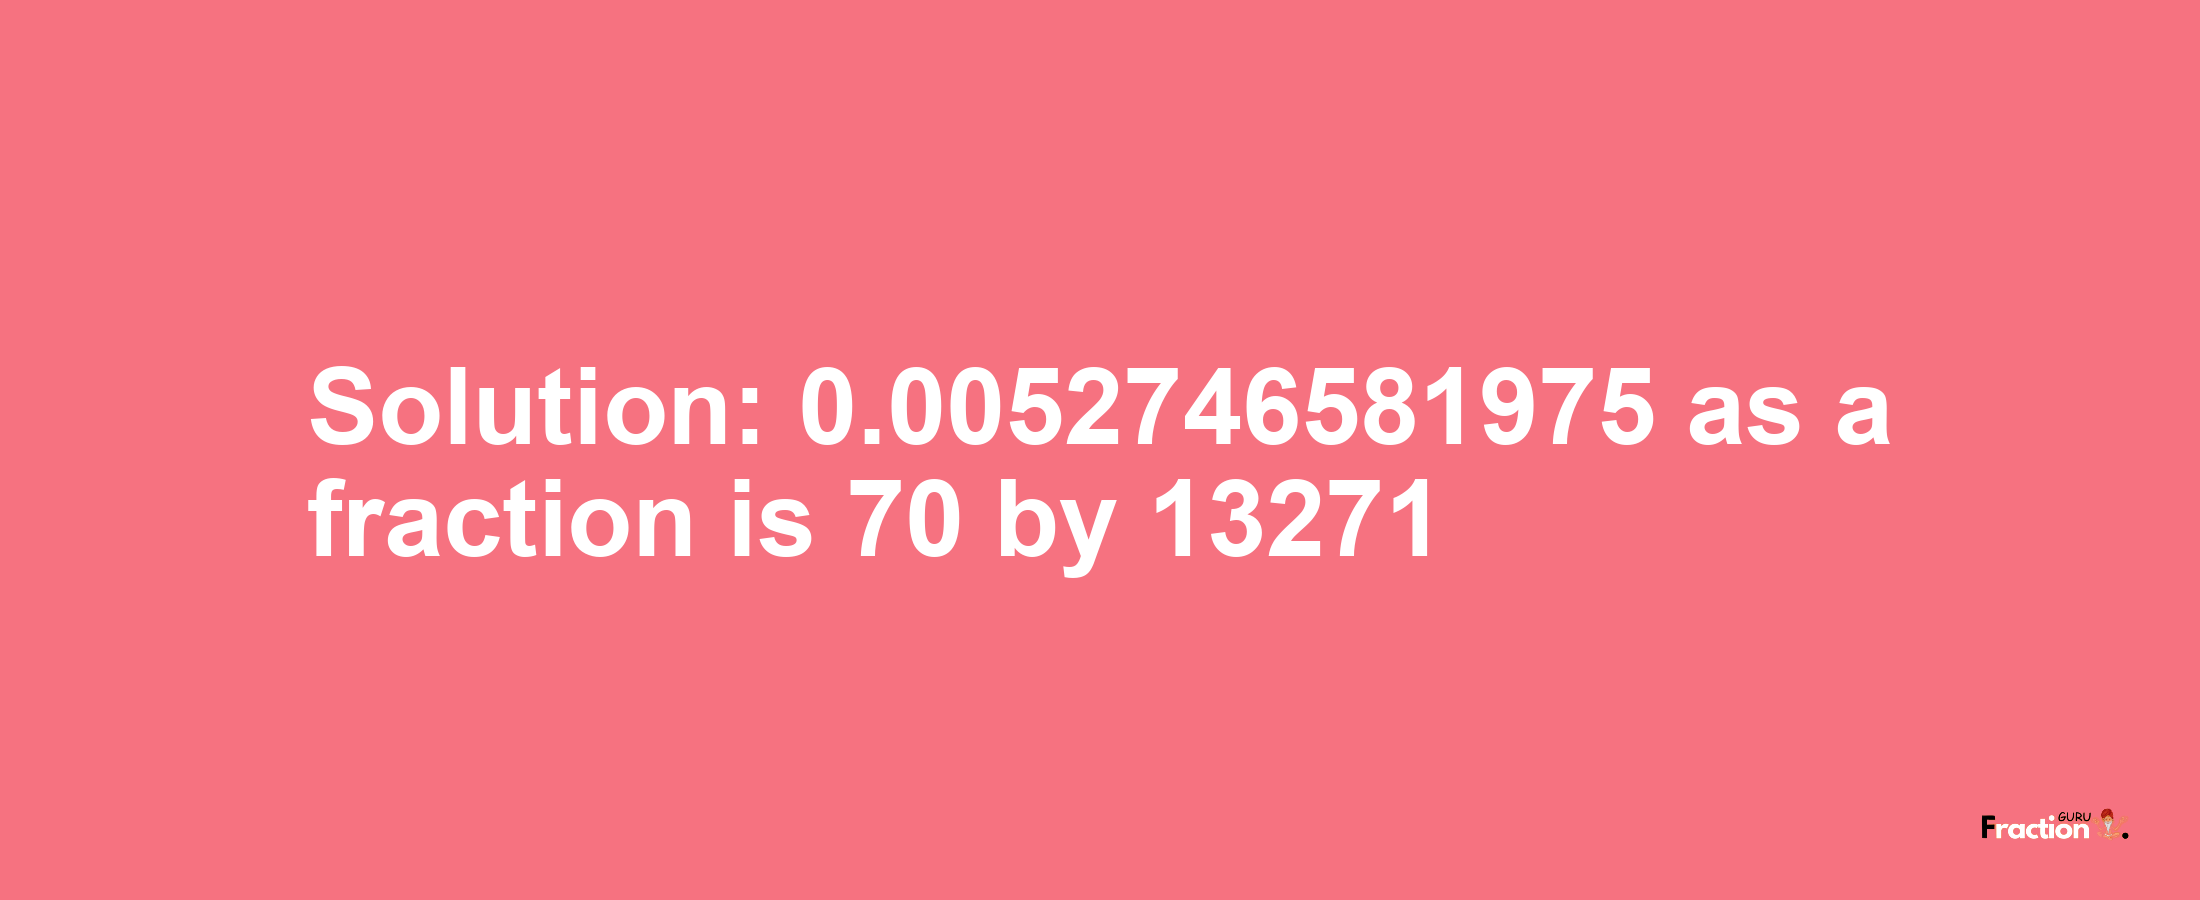 Solution:0.0052746581975 as a fraction is 70/13271